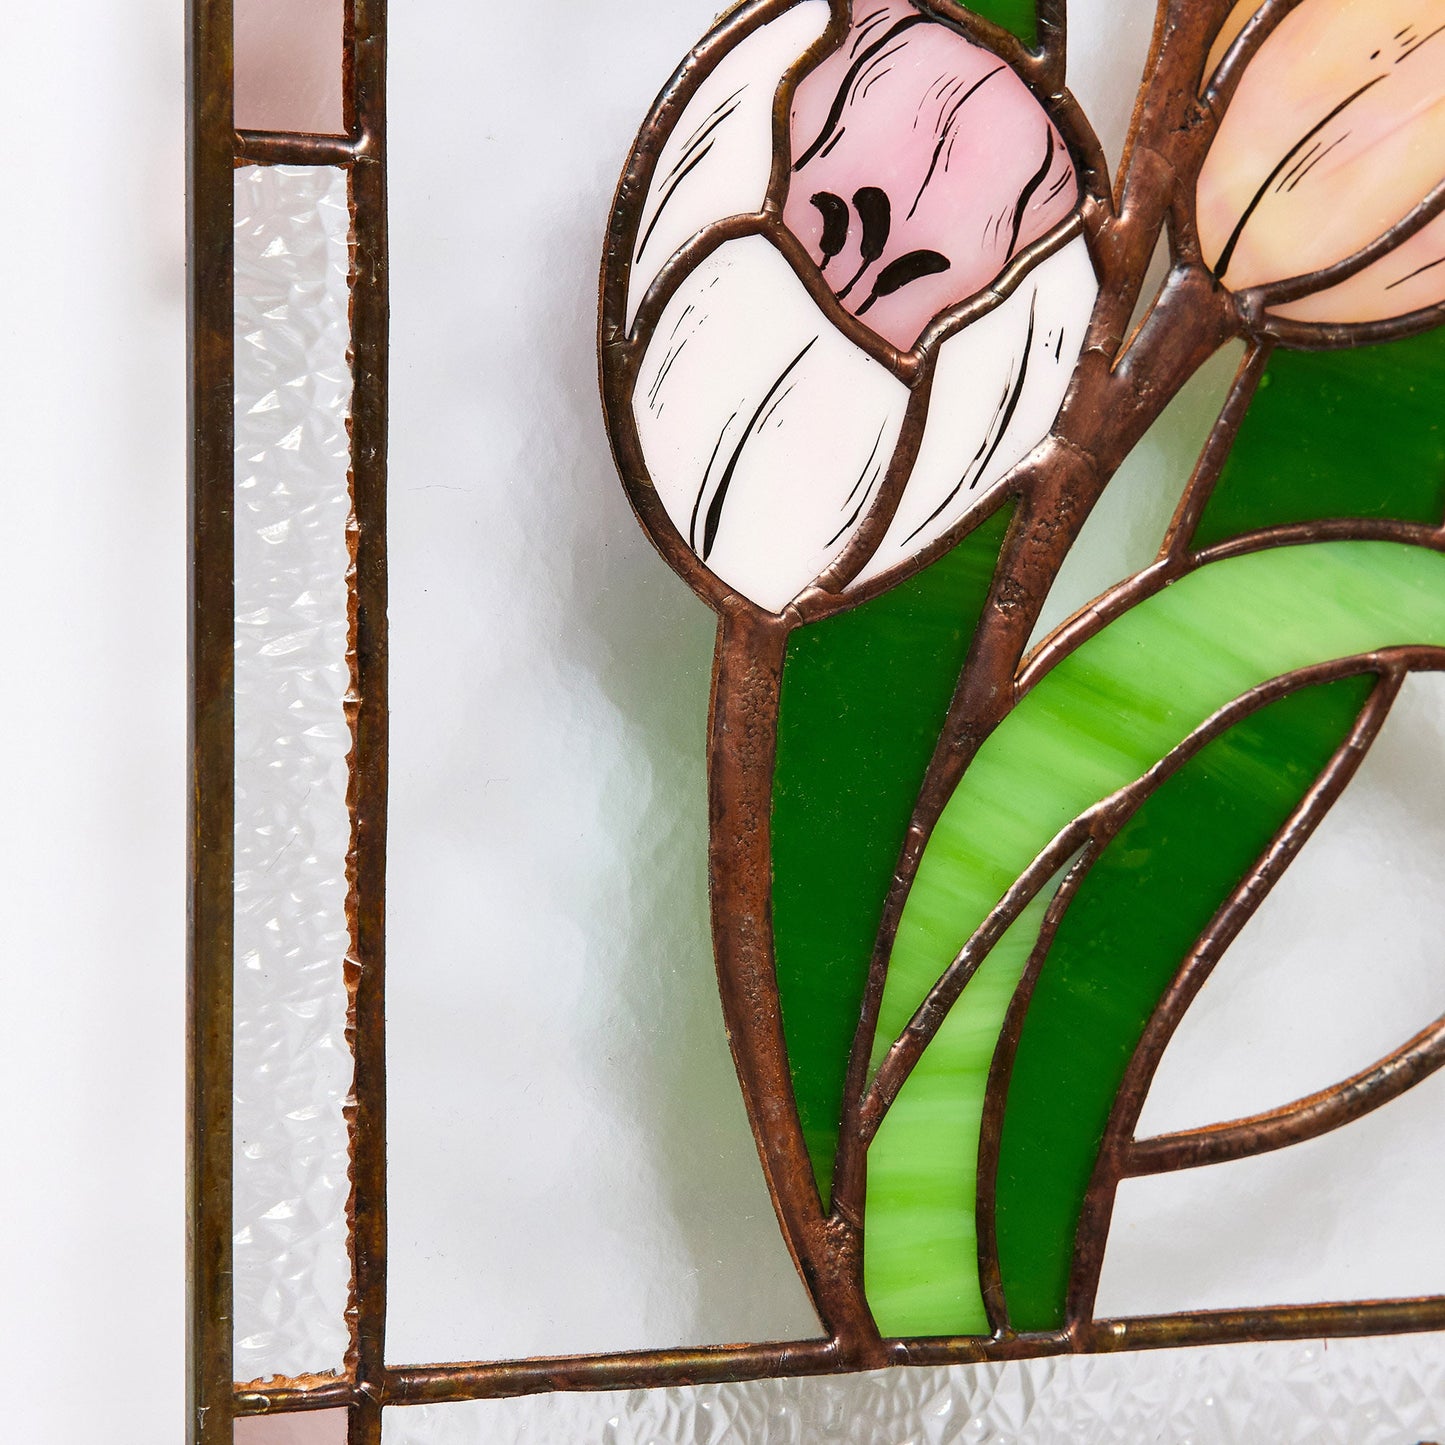 Tulip Stained Glass Panel Flower